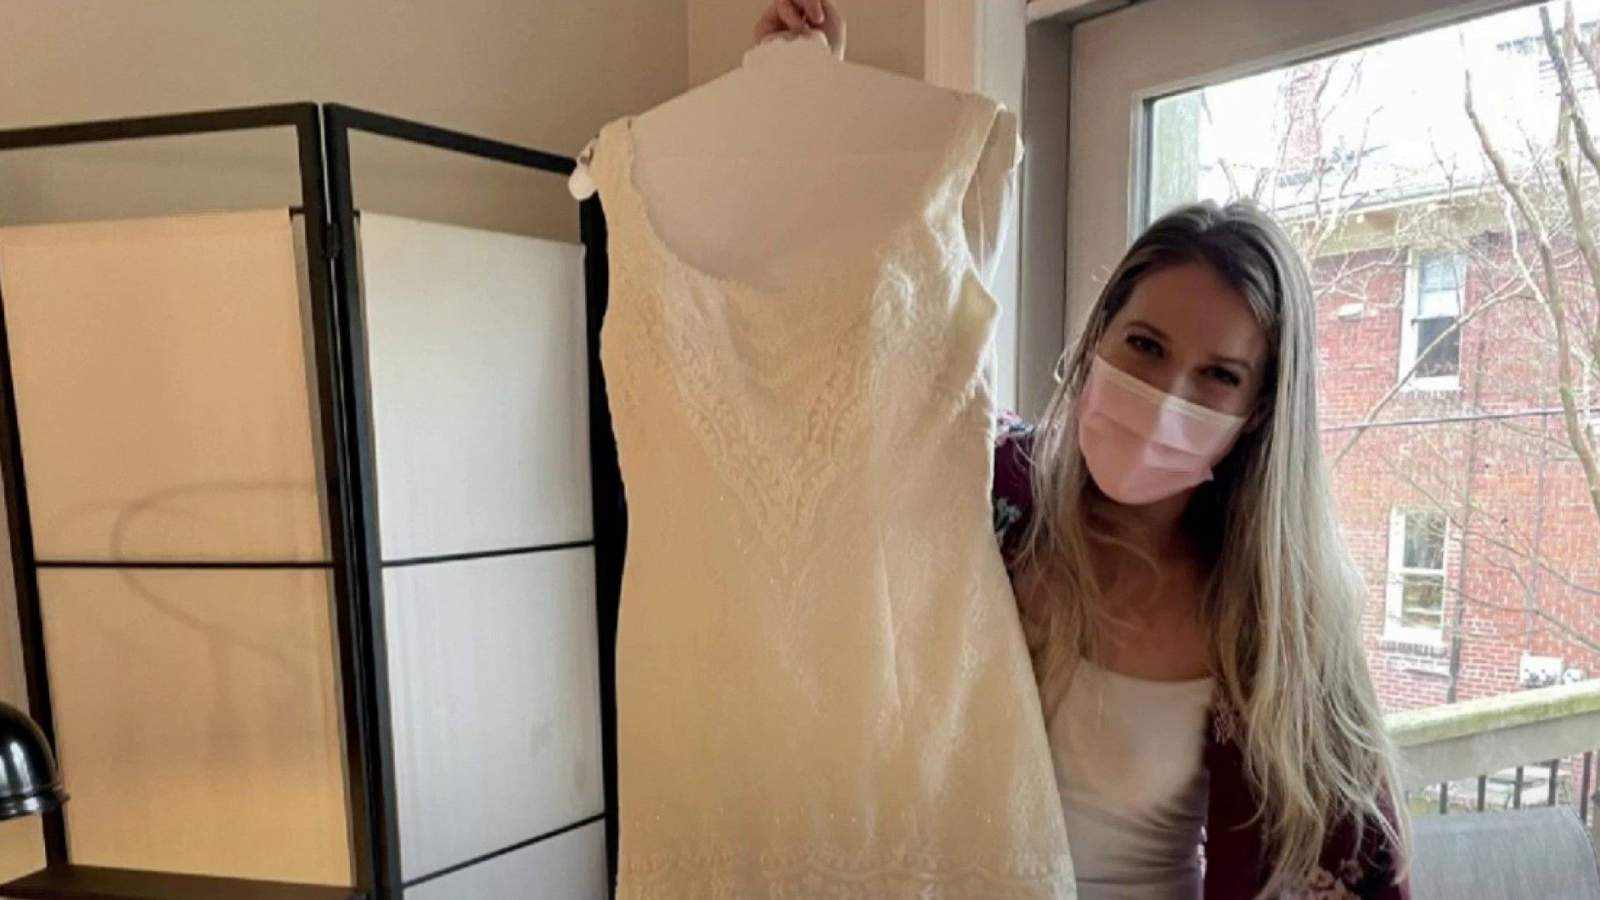 Here’s how you could get this wedding dress for free!